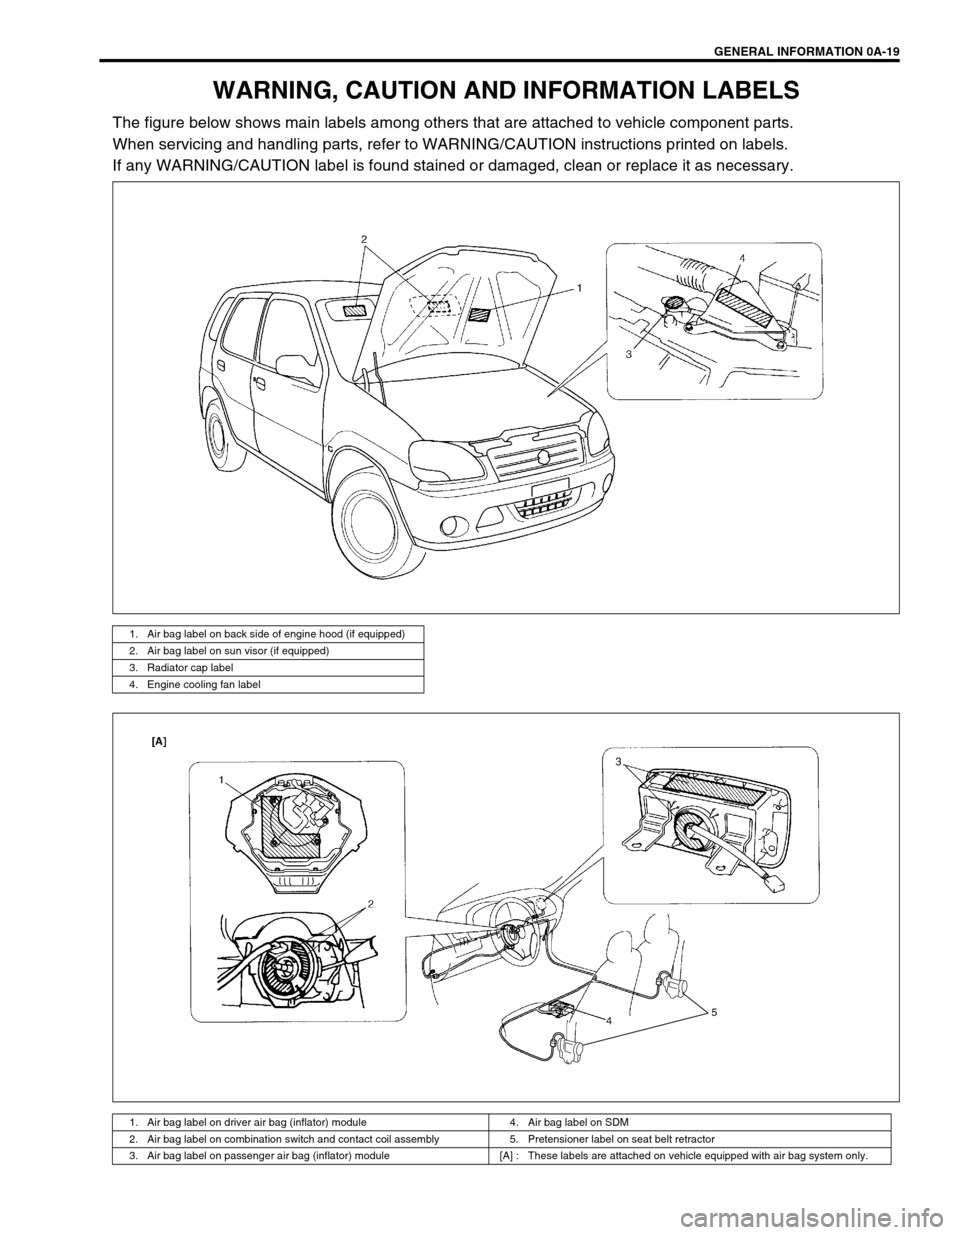 SUZUKI SWIFT 2000 1.G RG413 Service Workshop Manual GENERAL INFORMATION 0A-19
WARNING, CAUTION AND INFORMATION LABELS
The figure below shows main labels among others that are attached to vehicle component parts.
When servicing and handling parts, refer